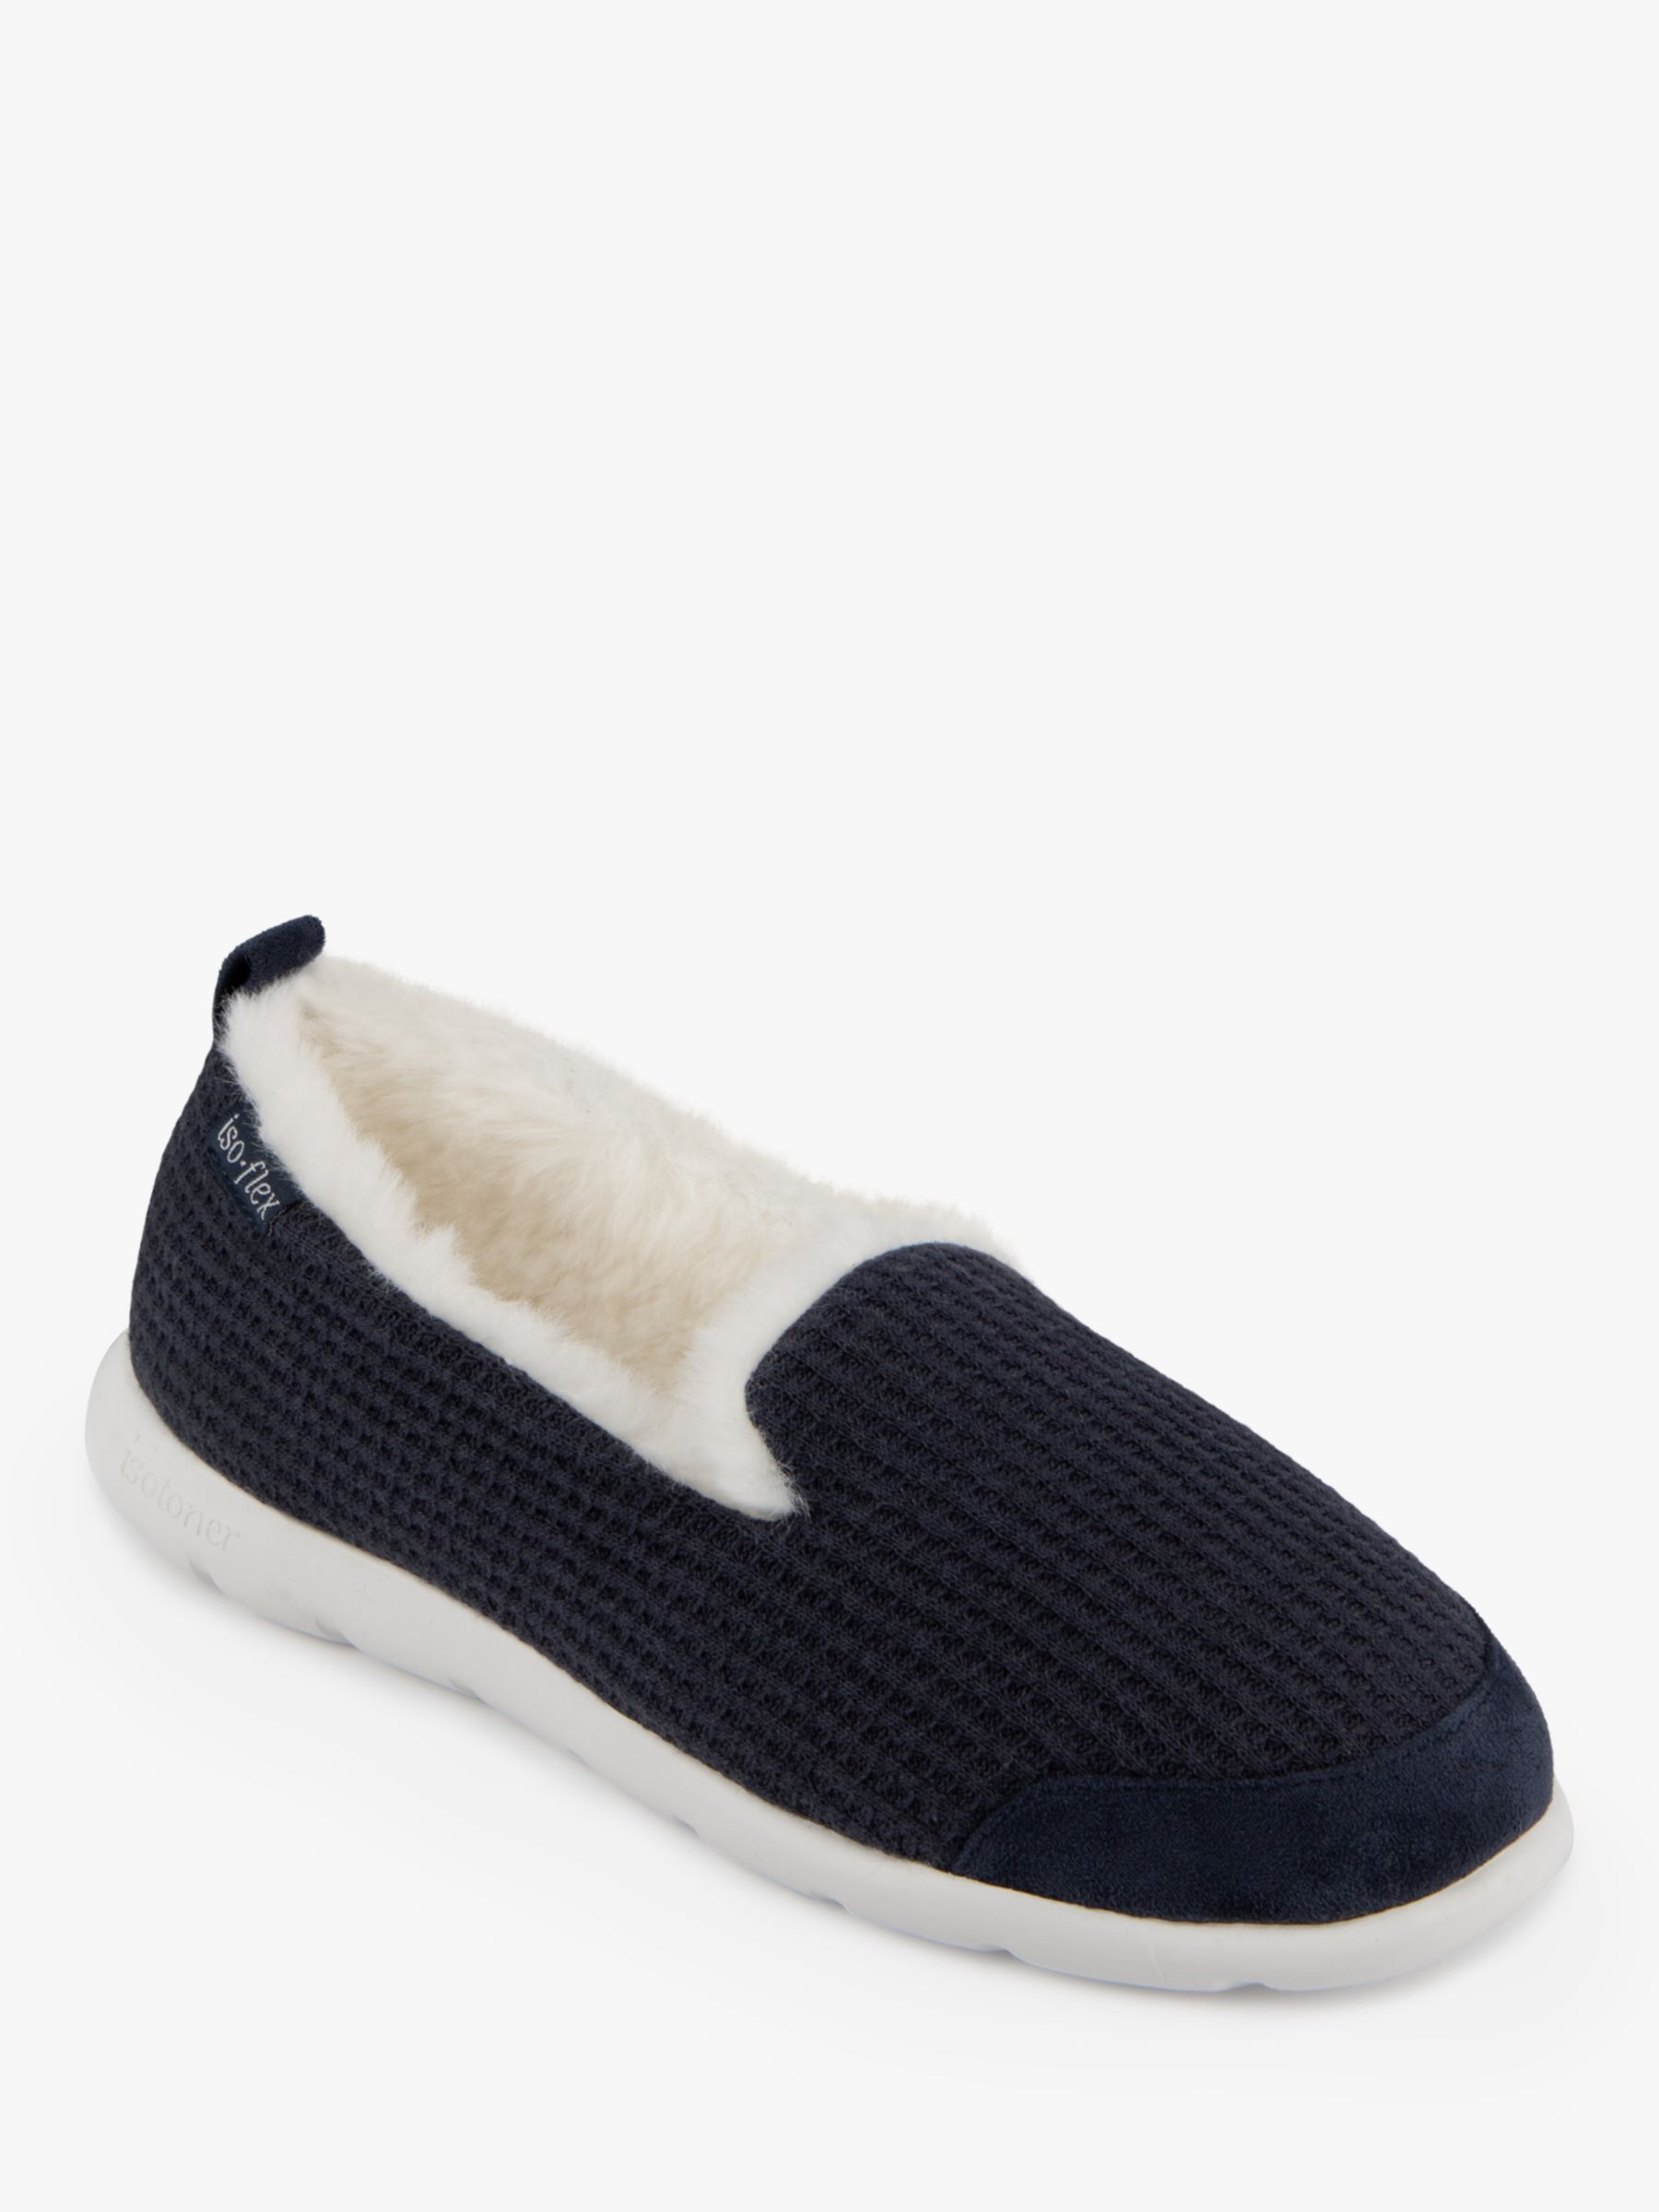 totes Iso-Flex Waffle Full Back Slippers, Navy at John Lewis & Partners